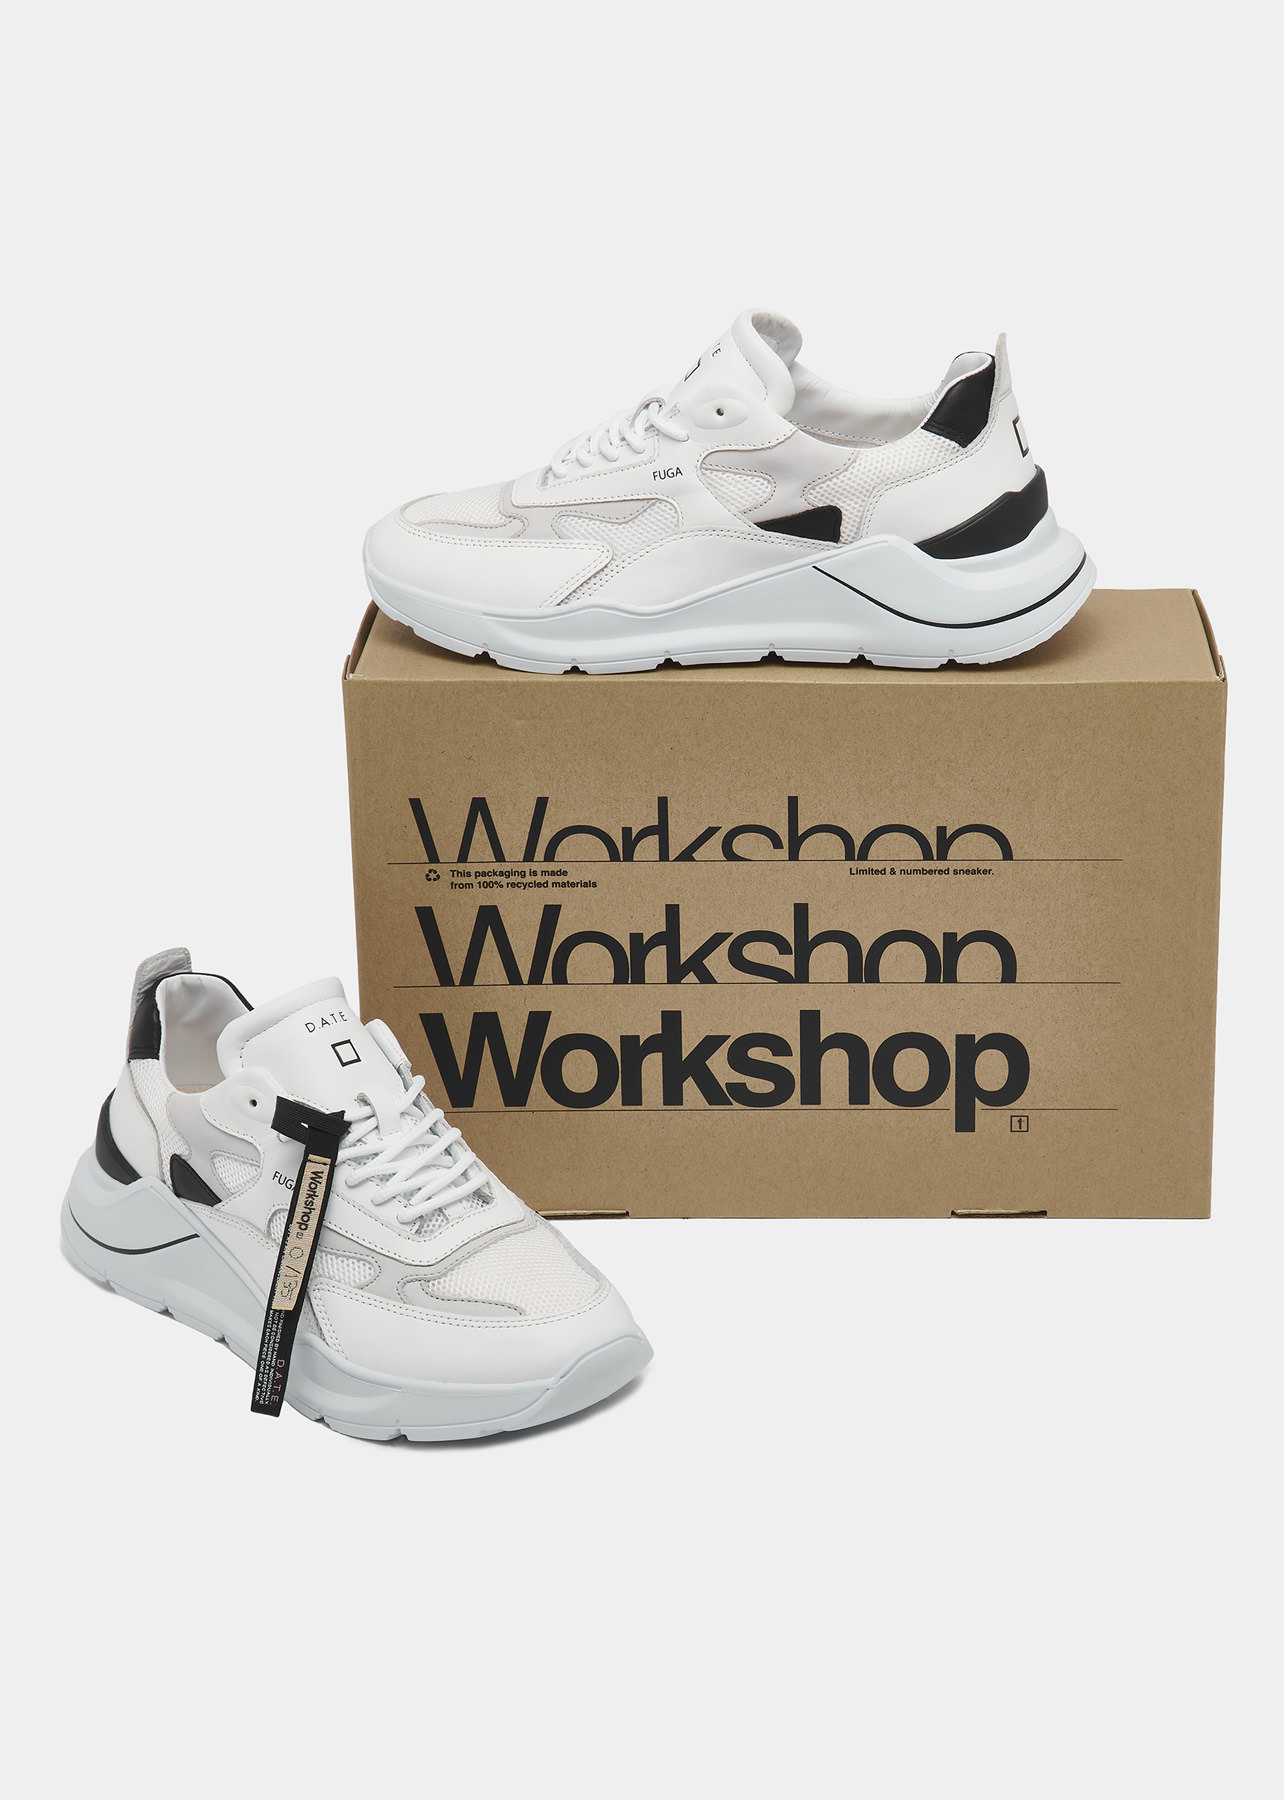 D.A.T.E. Sneakers FUGA WORKSHOP MESH WHITE | Date shoes